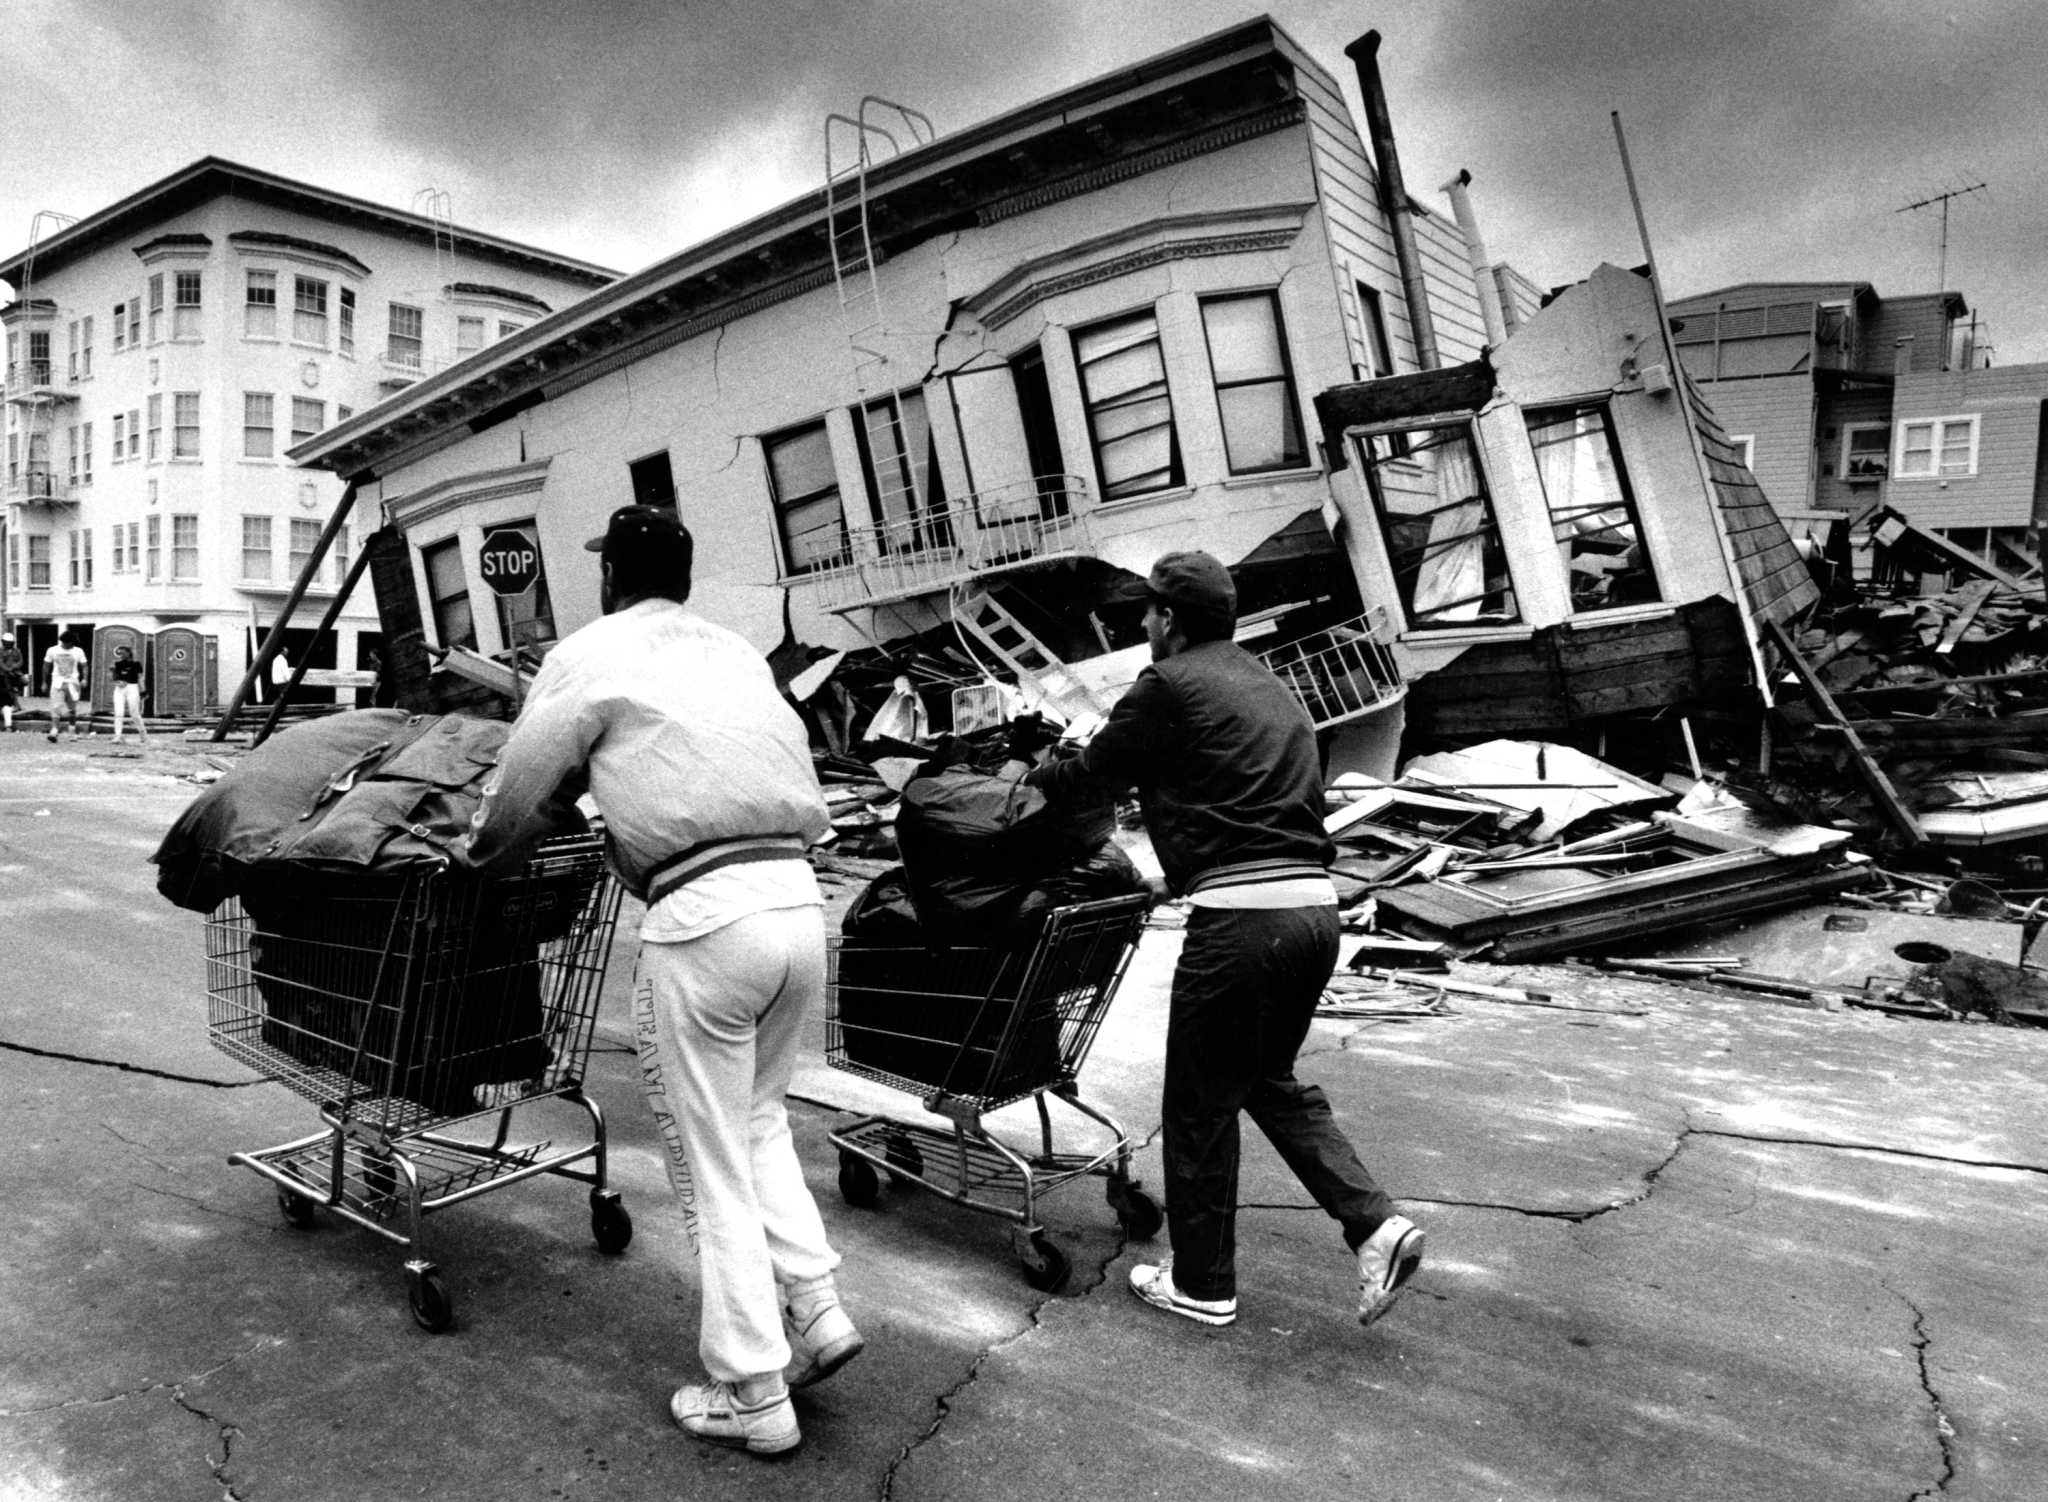 ‘San Francisco earthquakes’ went viral because of a report detailing